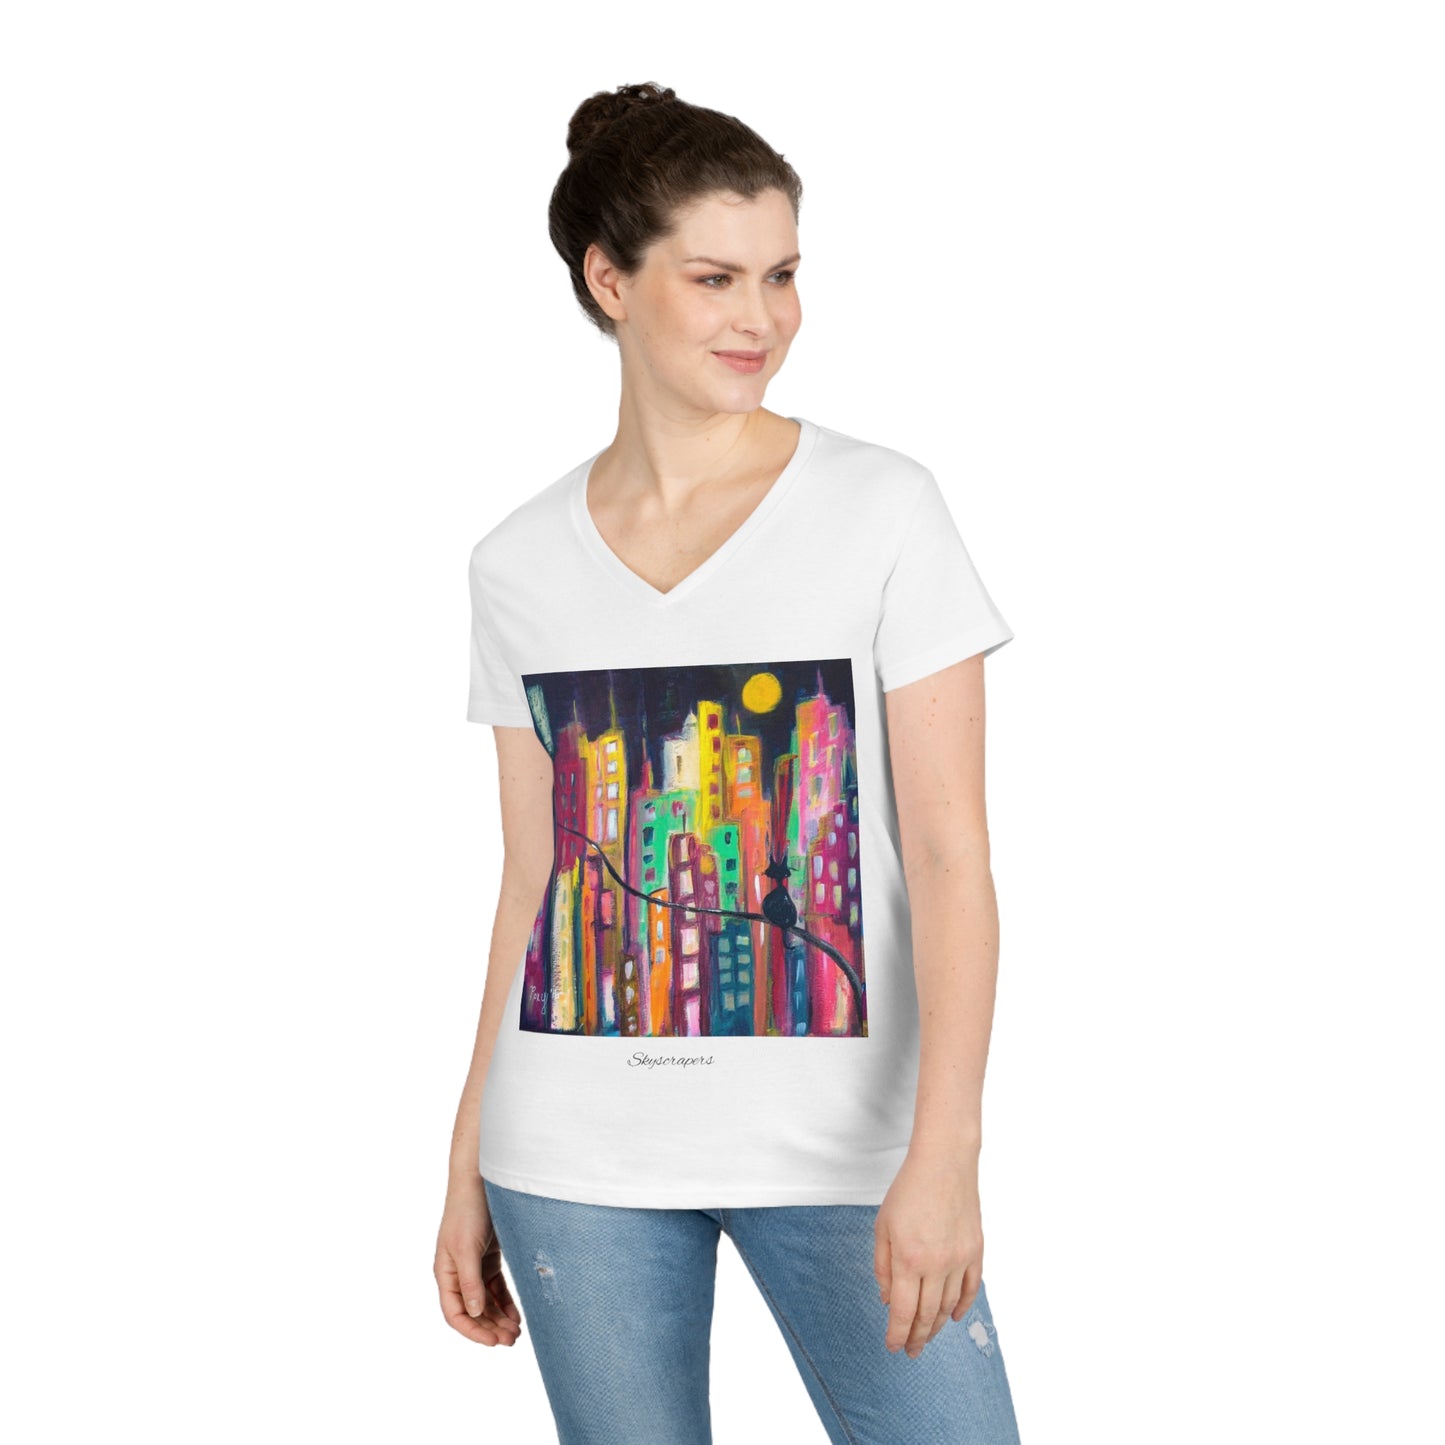 Skyscrapers Cat in a Colorful Cityscape Ladies' V-Neck T-Shirt